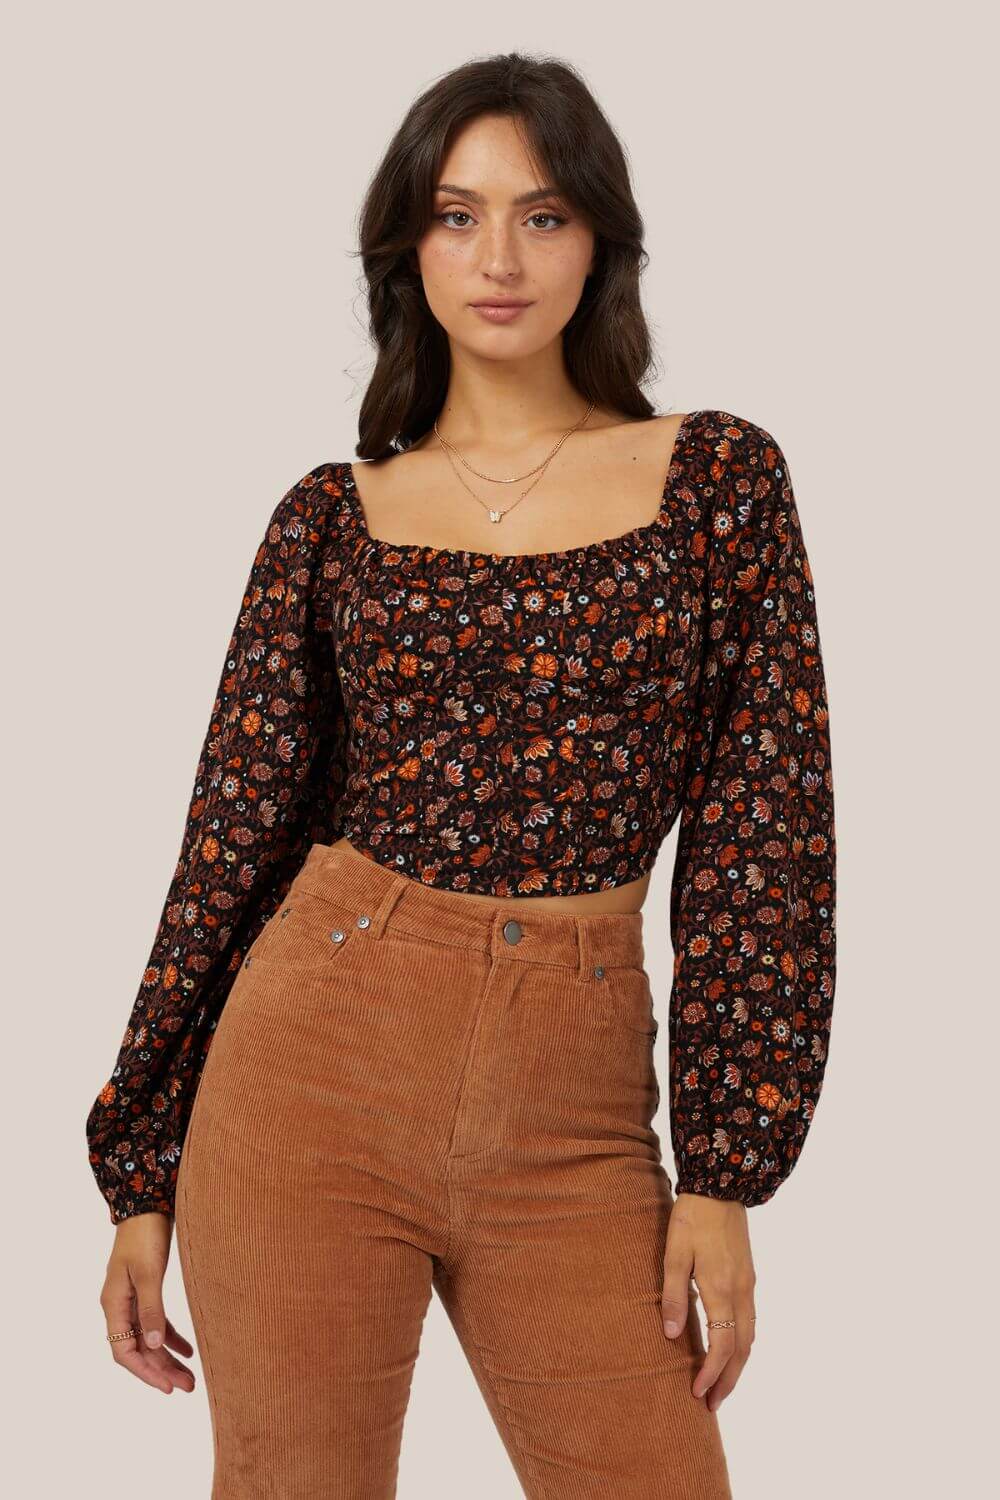 All About Eve Luna Floral Top